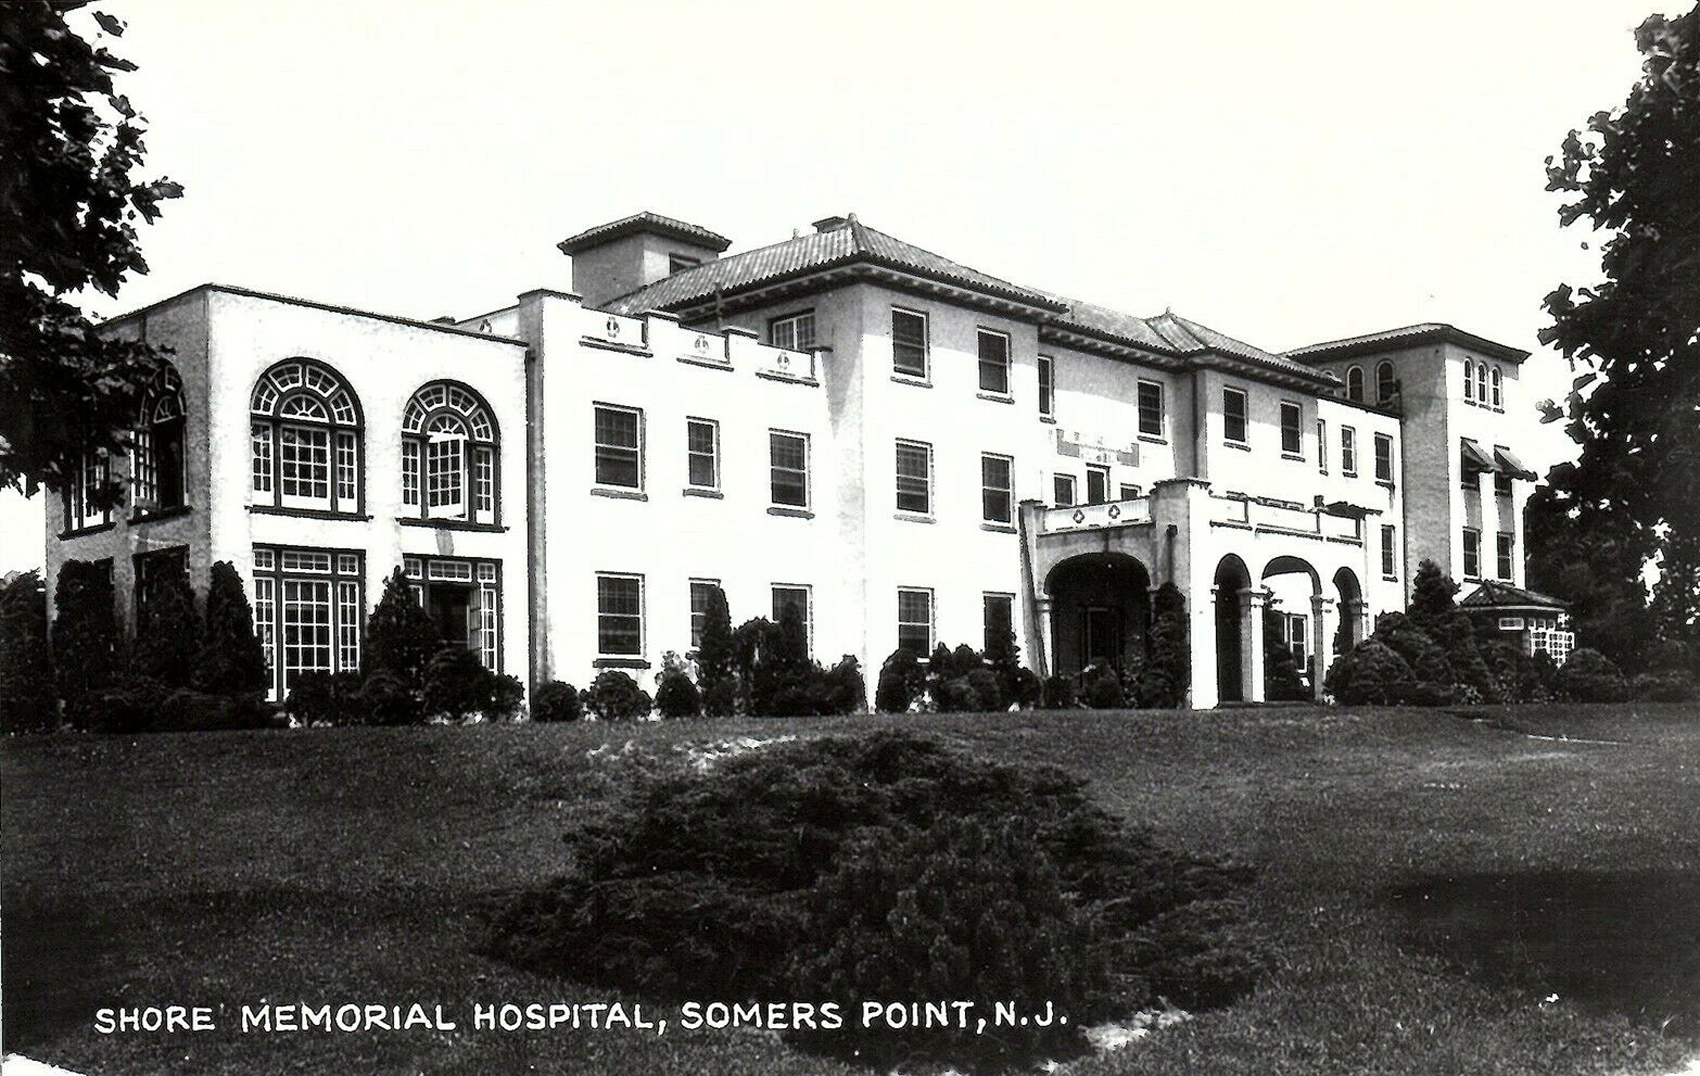 Somers Point - A view of Shore Memorial Hospital